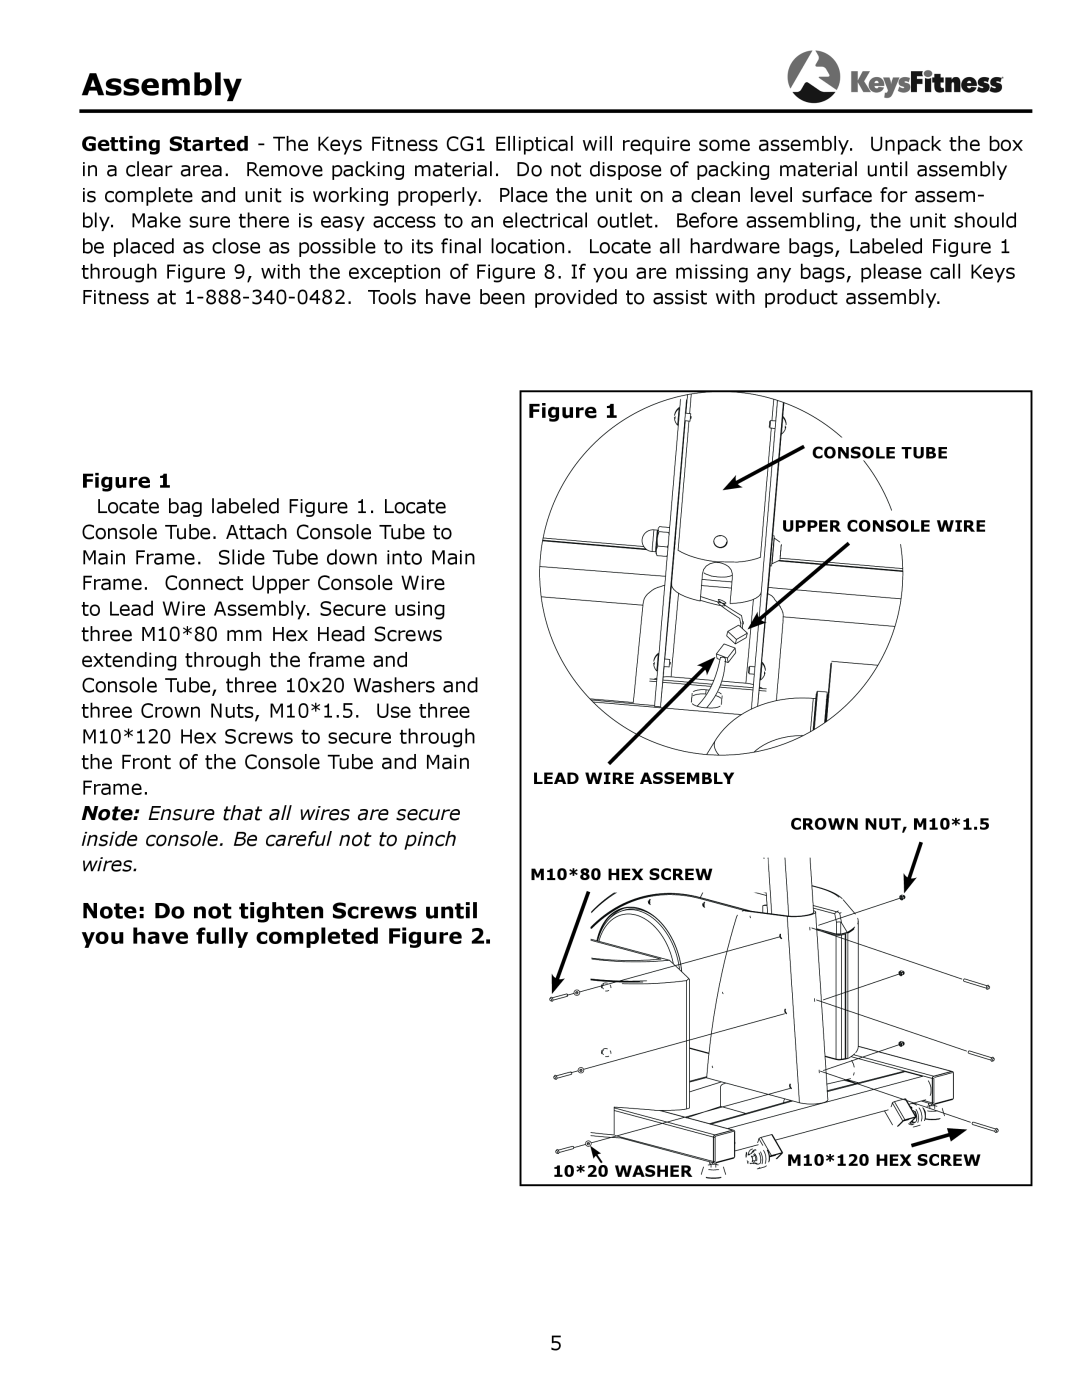 Keys Fitness 315-00106 owner manual Assembly, Note Do not tighten Screws until you have fully completed Figure 